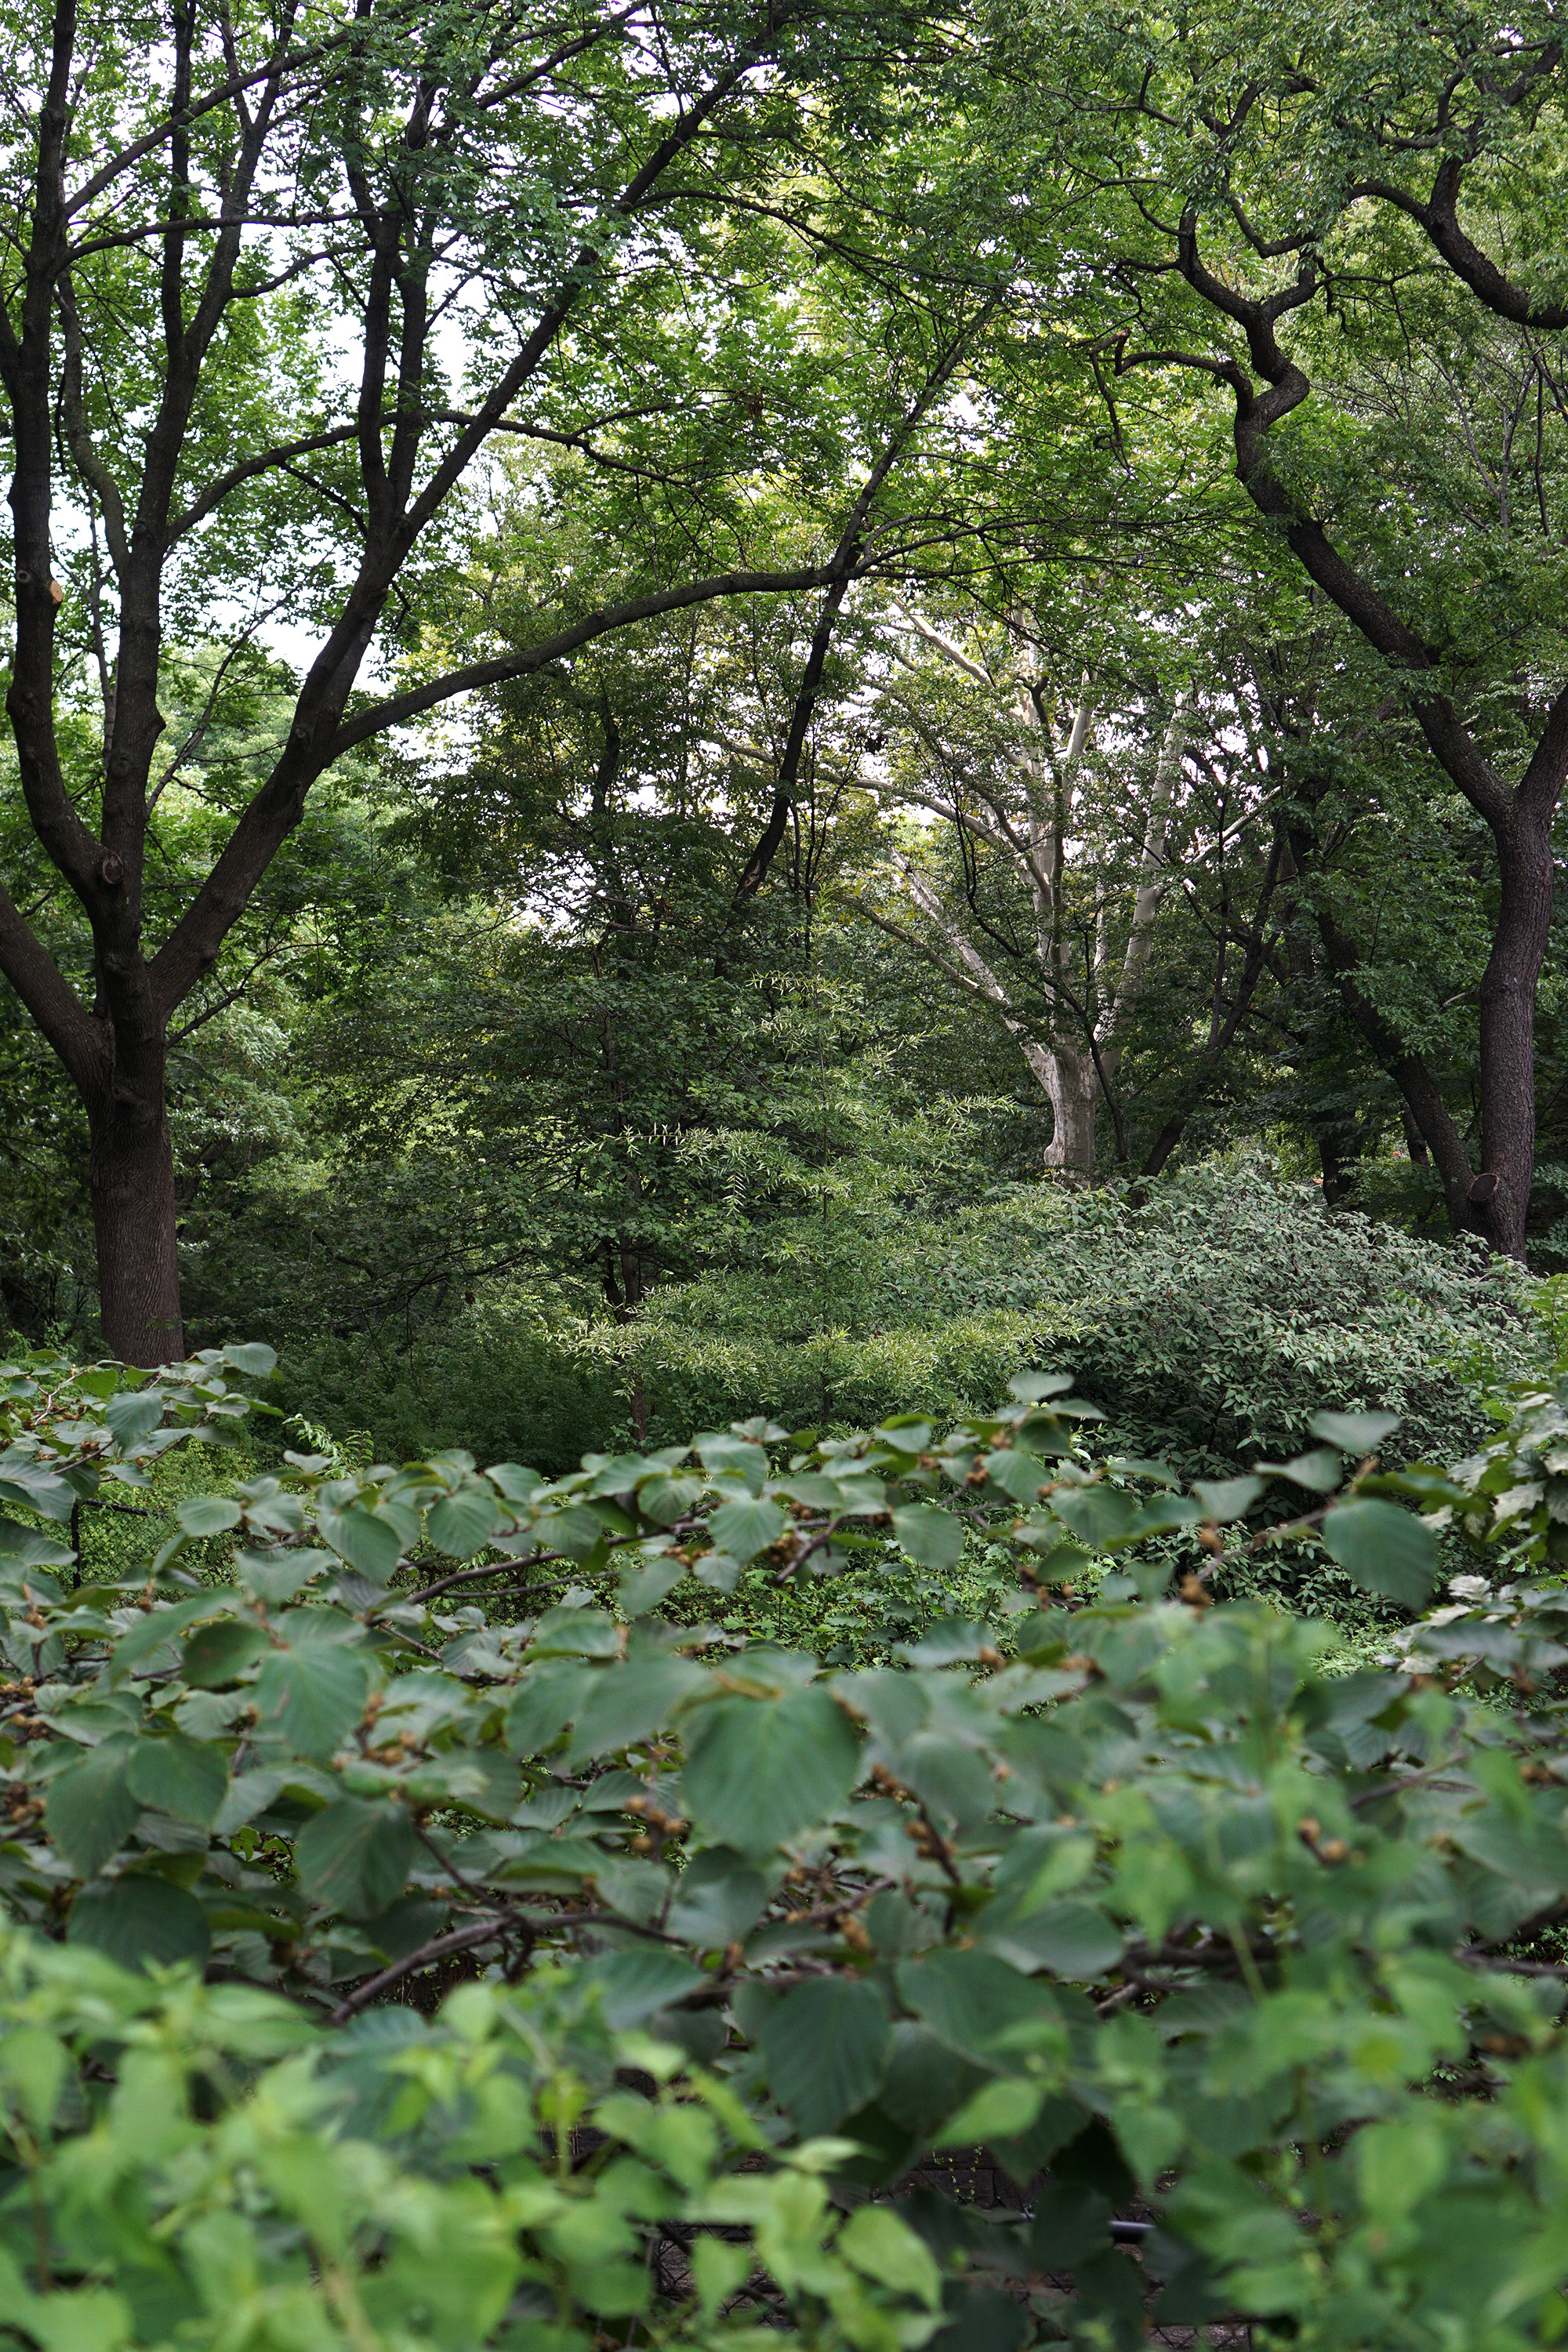 The Ramble, Central Park, New York City / Darker than Green